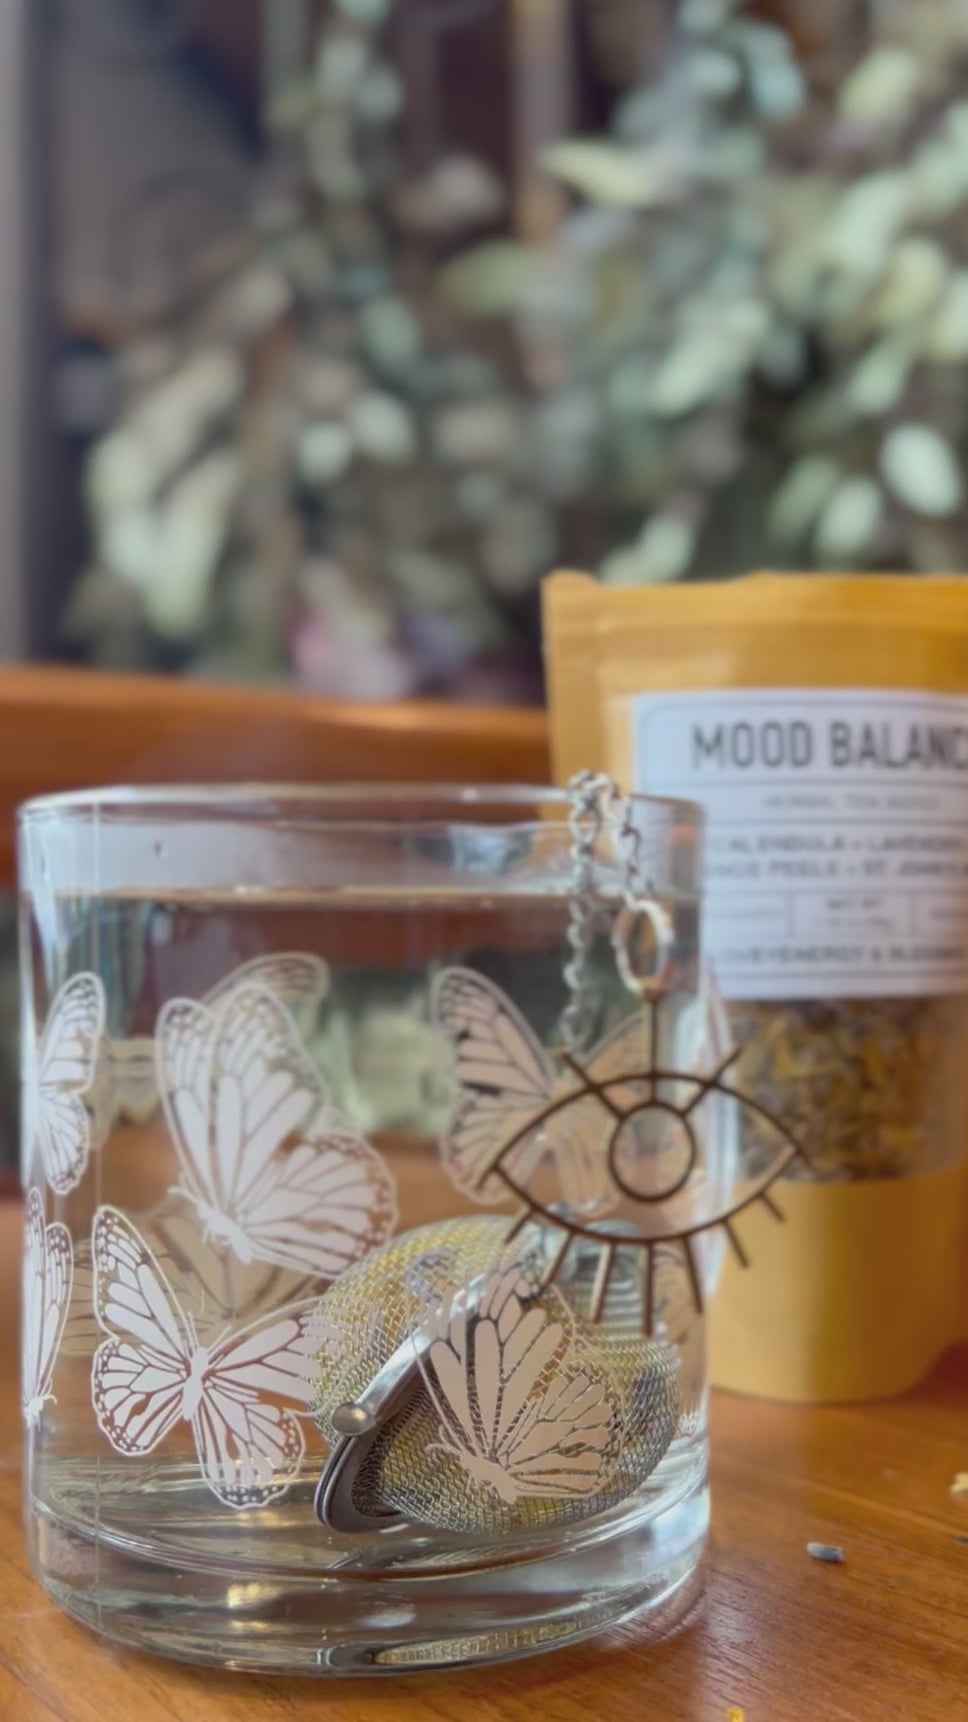 Video of clear glass mug featuring a wraparound design of ivory colored monarch butterflies